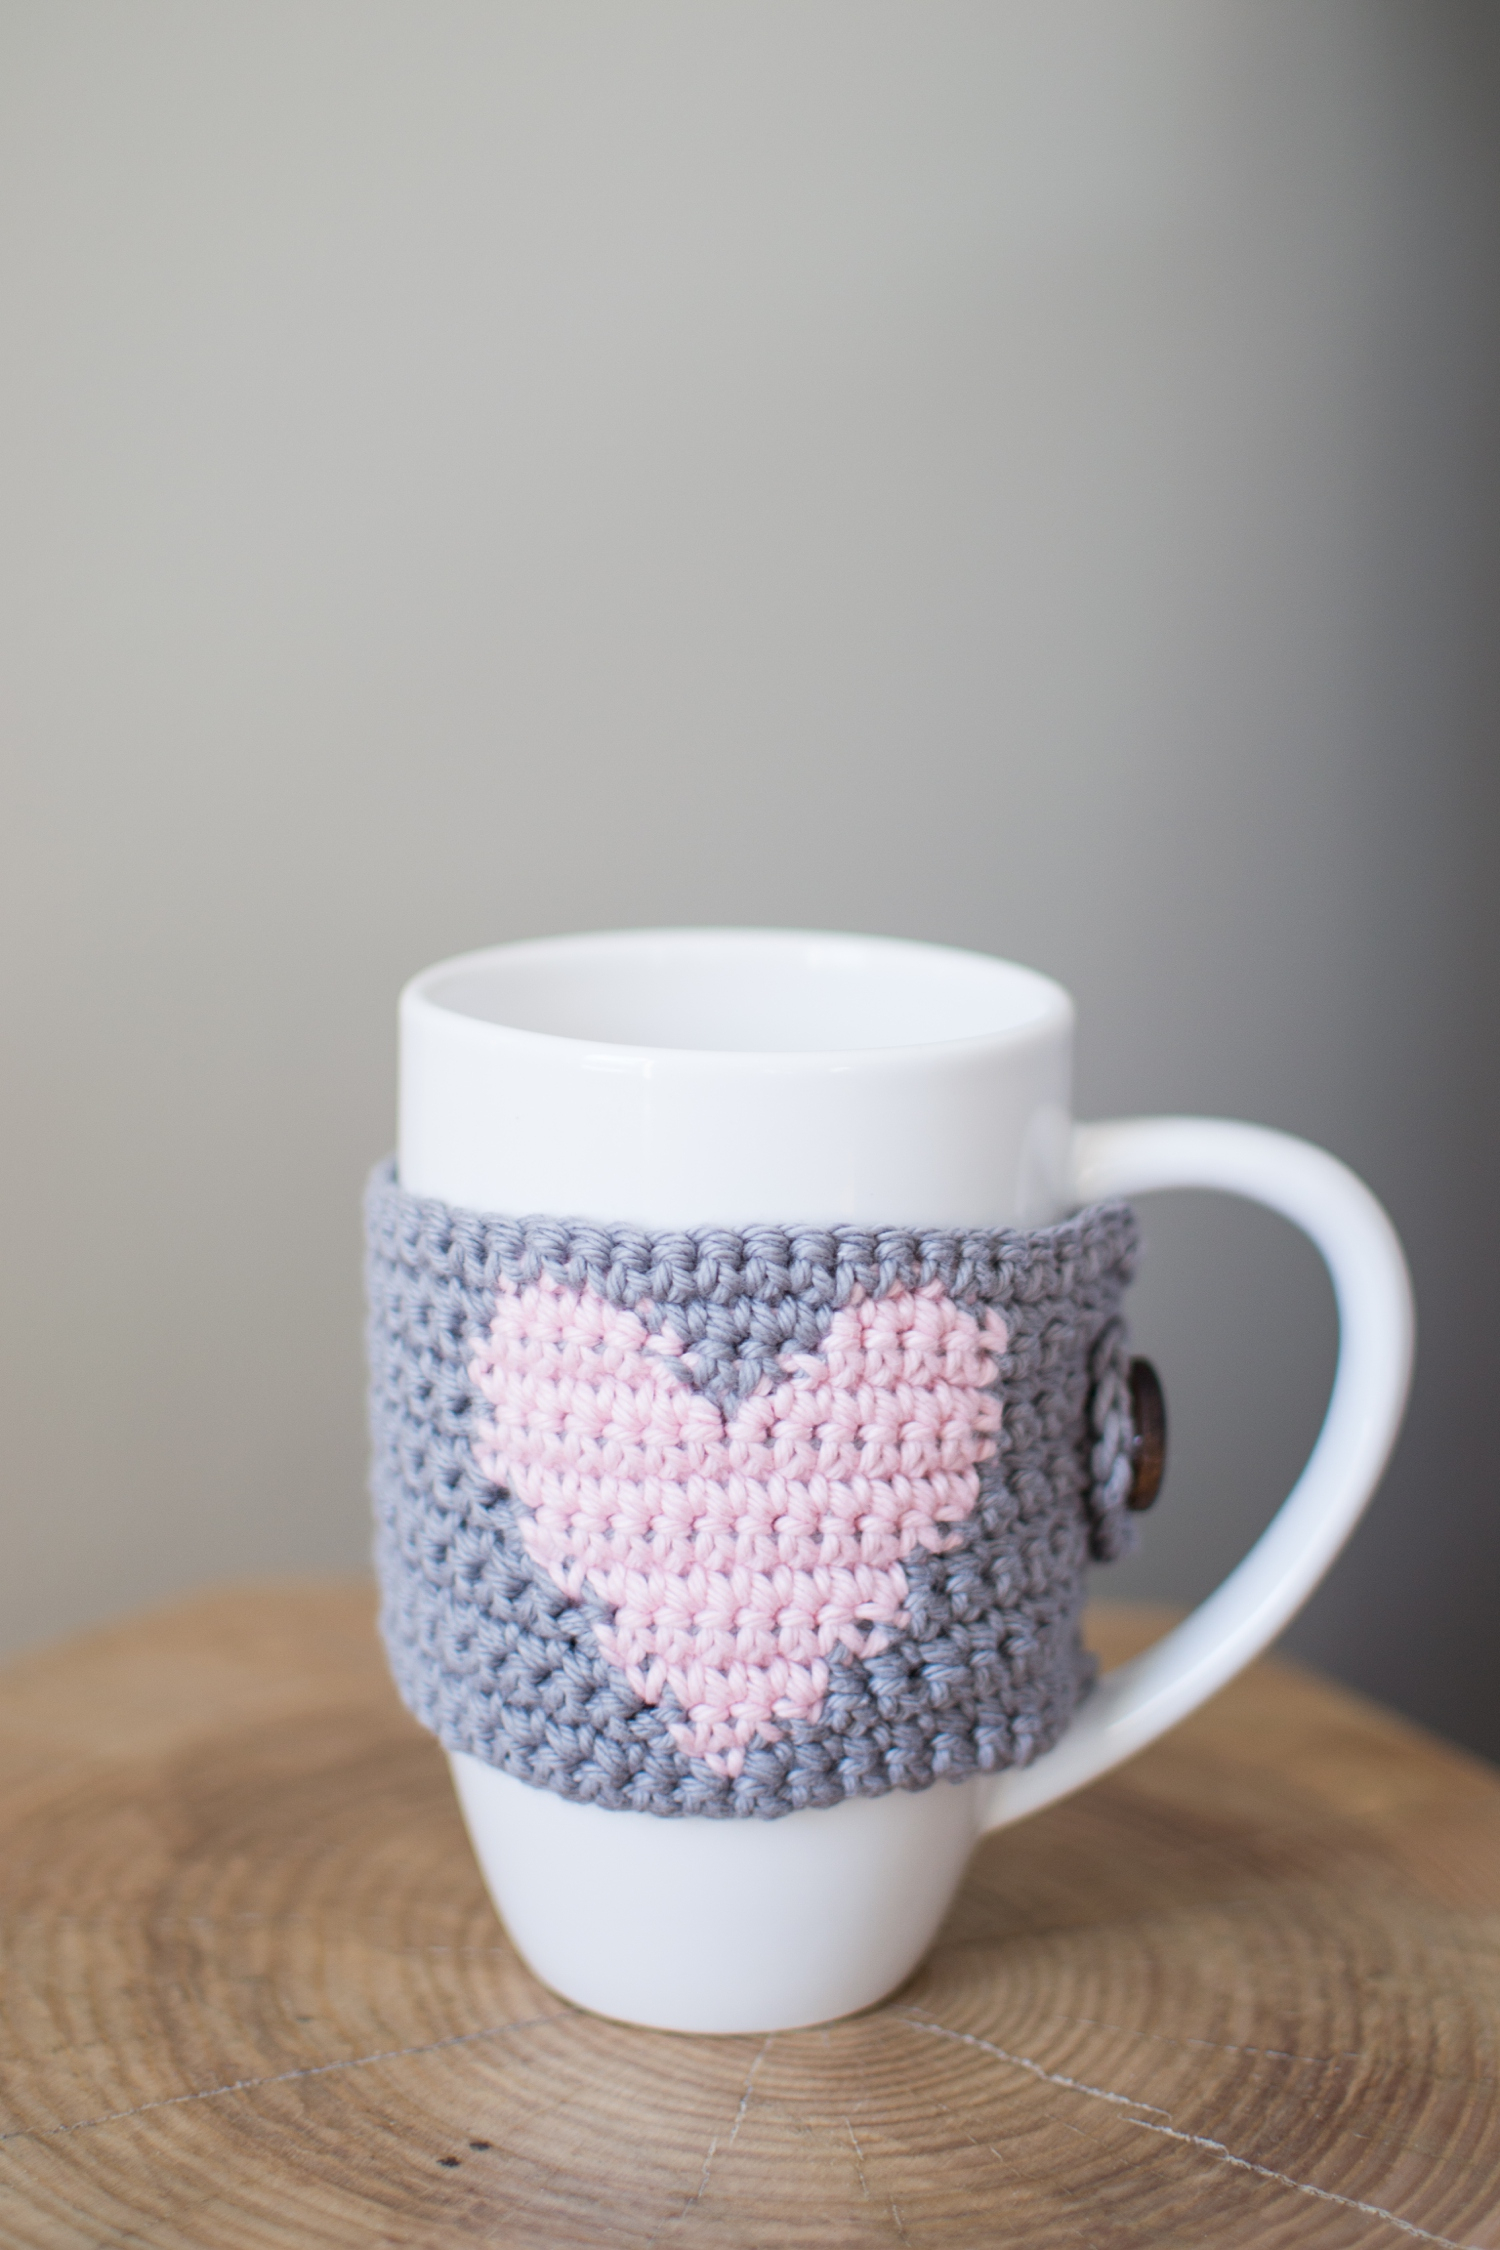 Cup Cosy Crochet Pattern The Simplicitea Heart Mug Cozy Crochet Pattern Woods And Wool